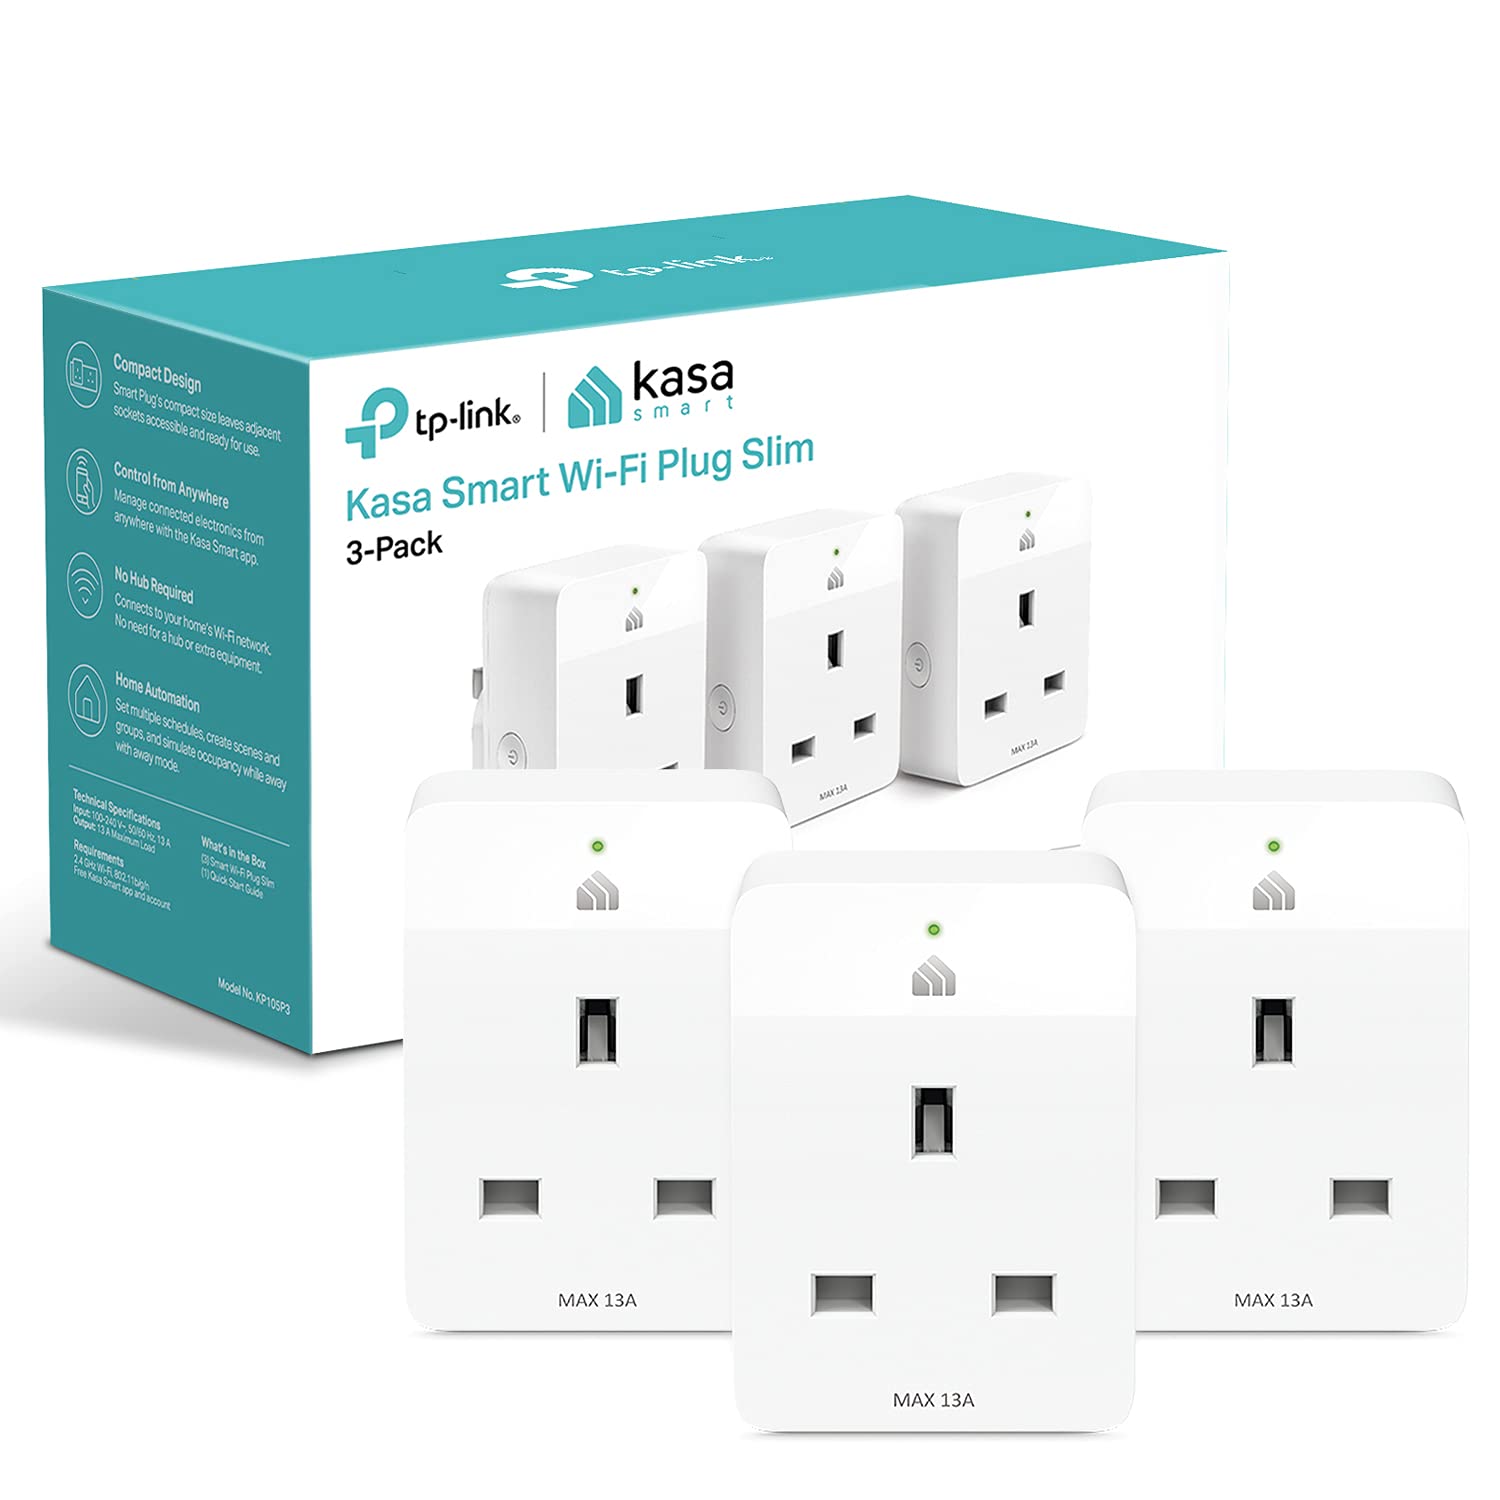 How To Reconnect Kasa Smart Plug To Wi-Fi